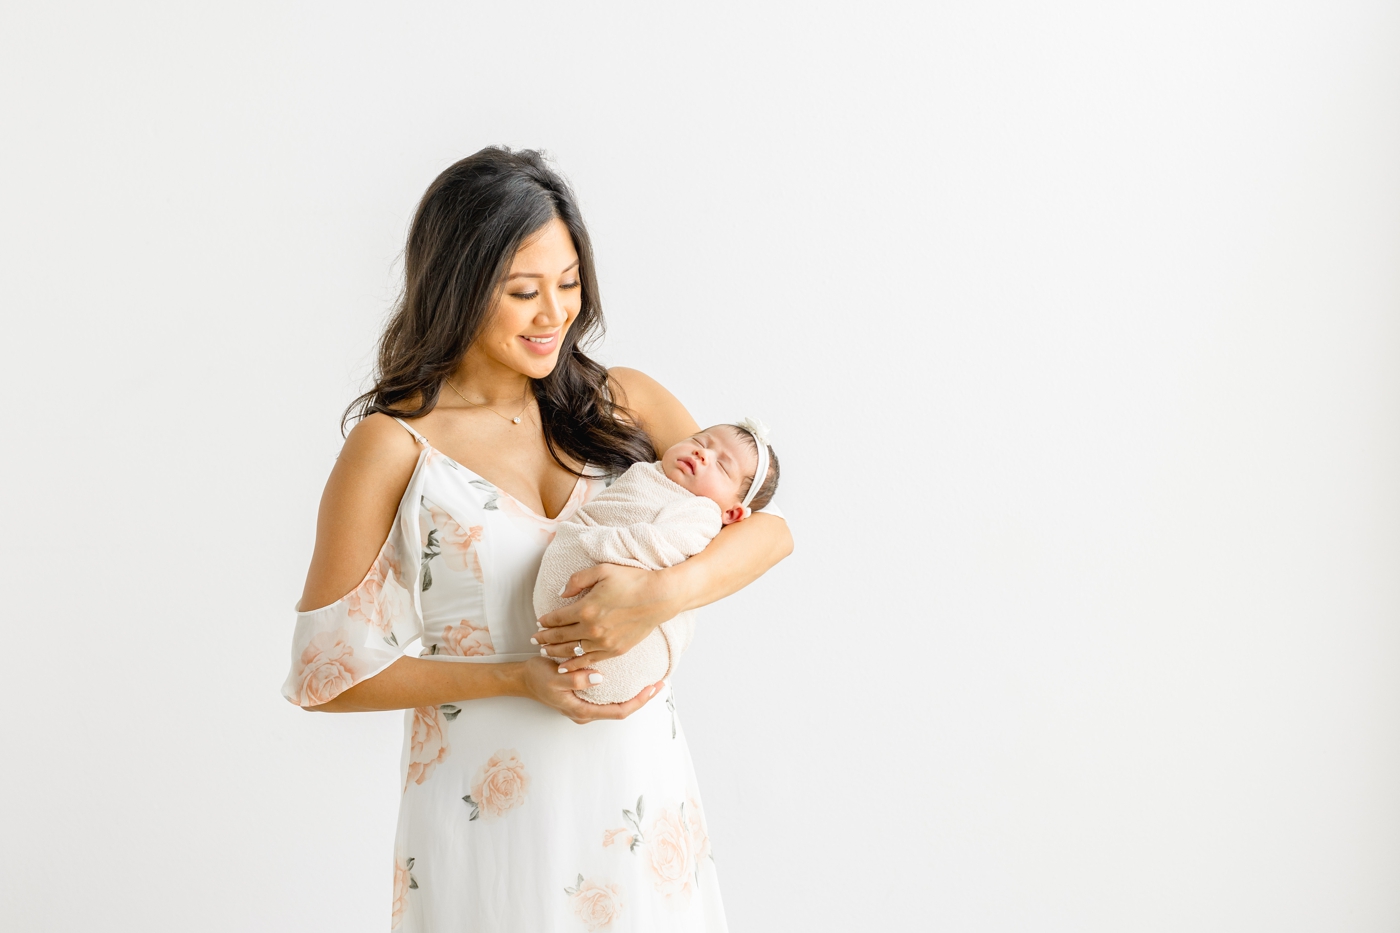 Mom wearing floral white maxi dress during studio newborn session. Photo by Sana Ahmed Photography.